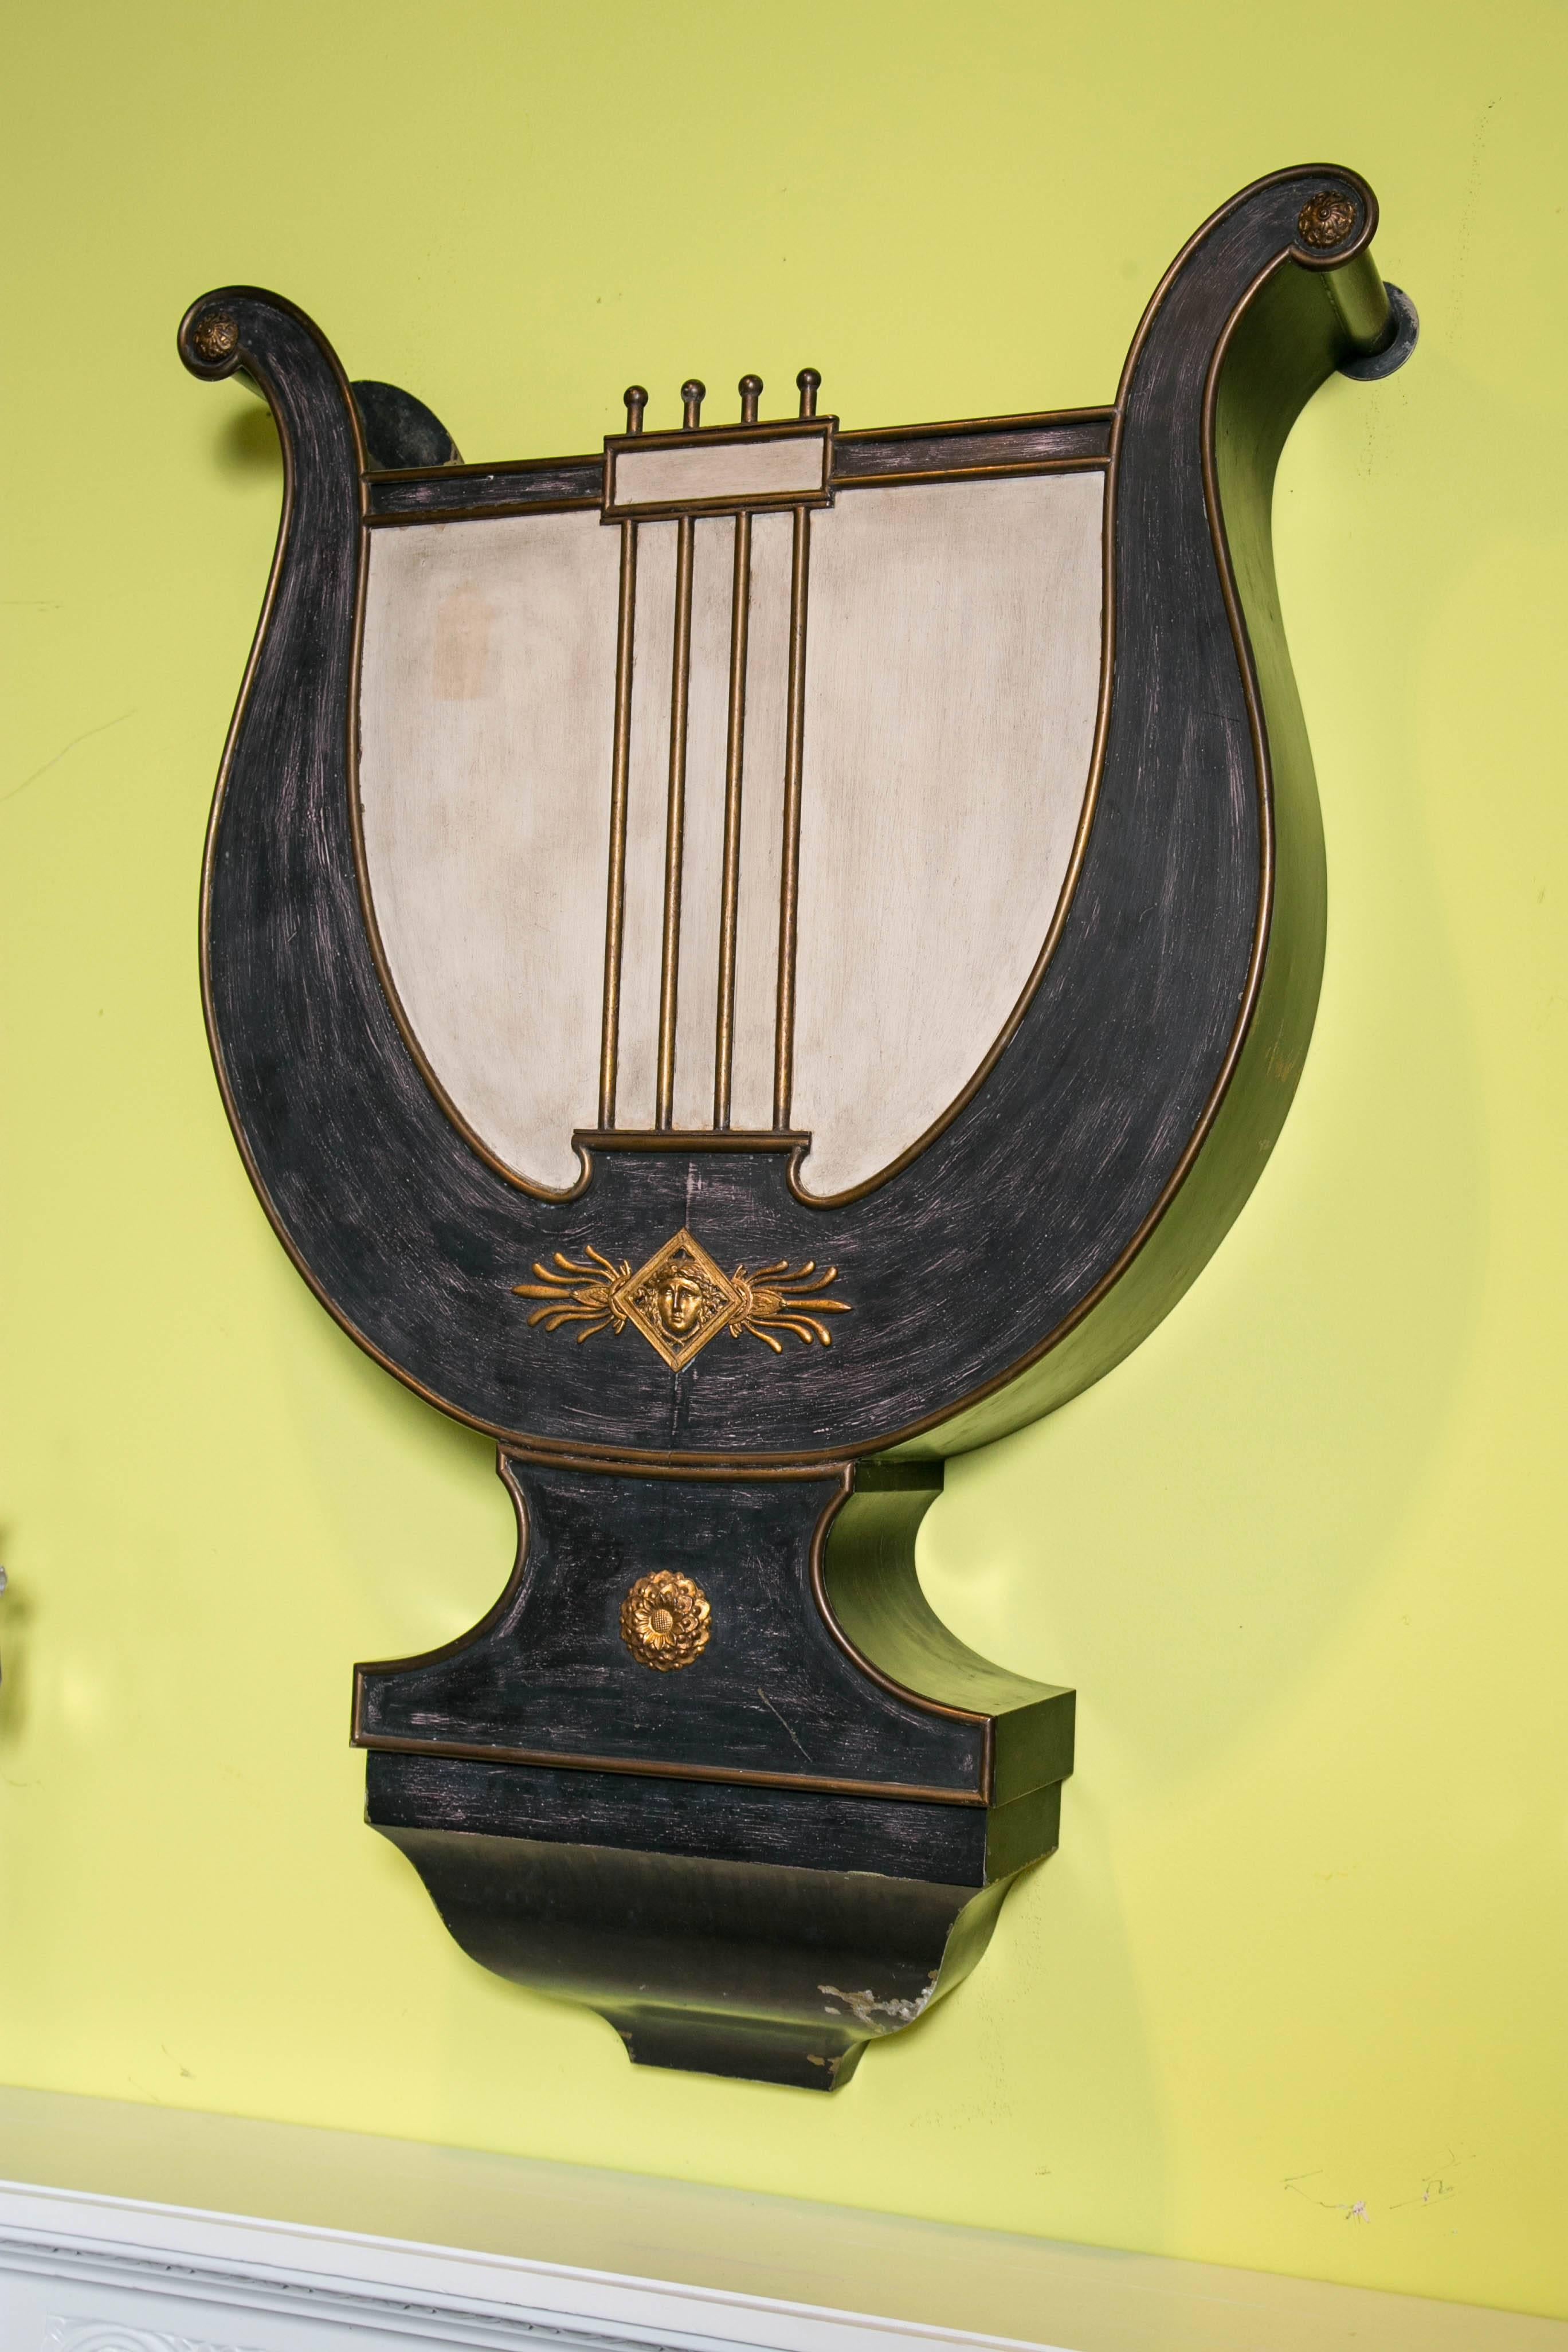 Lyre wall hung planter tole and iron nicely painted with gilt details.